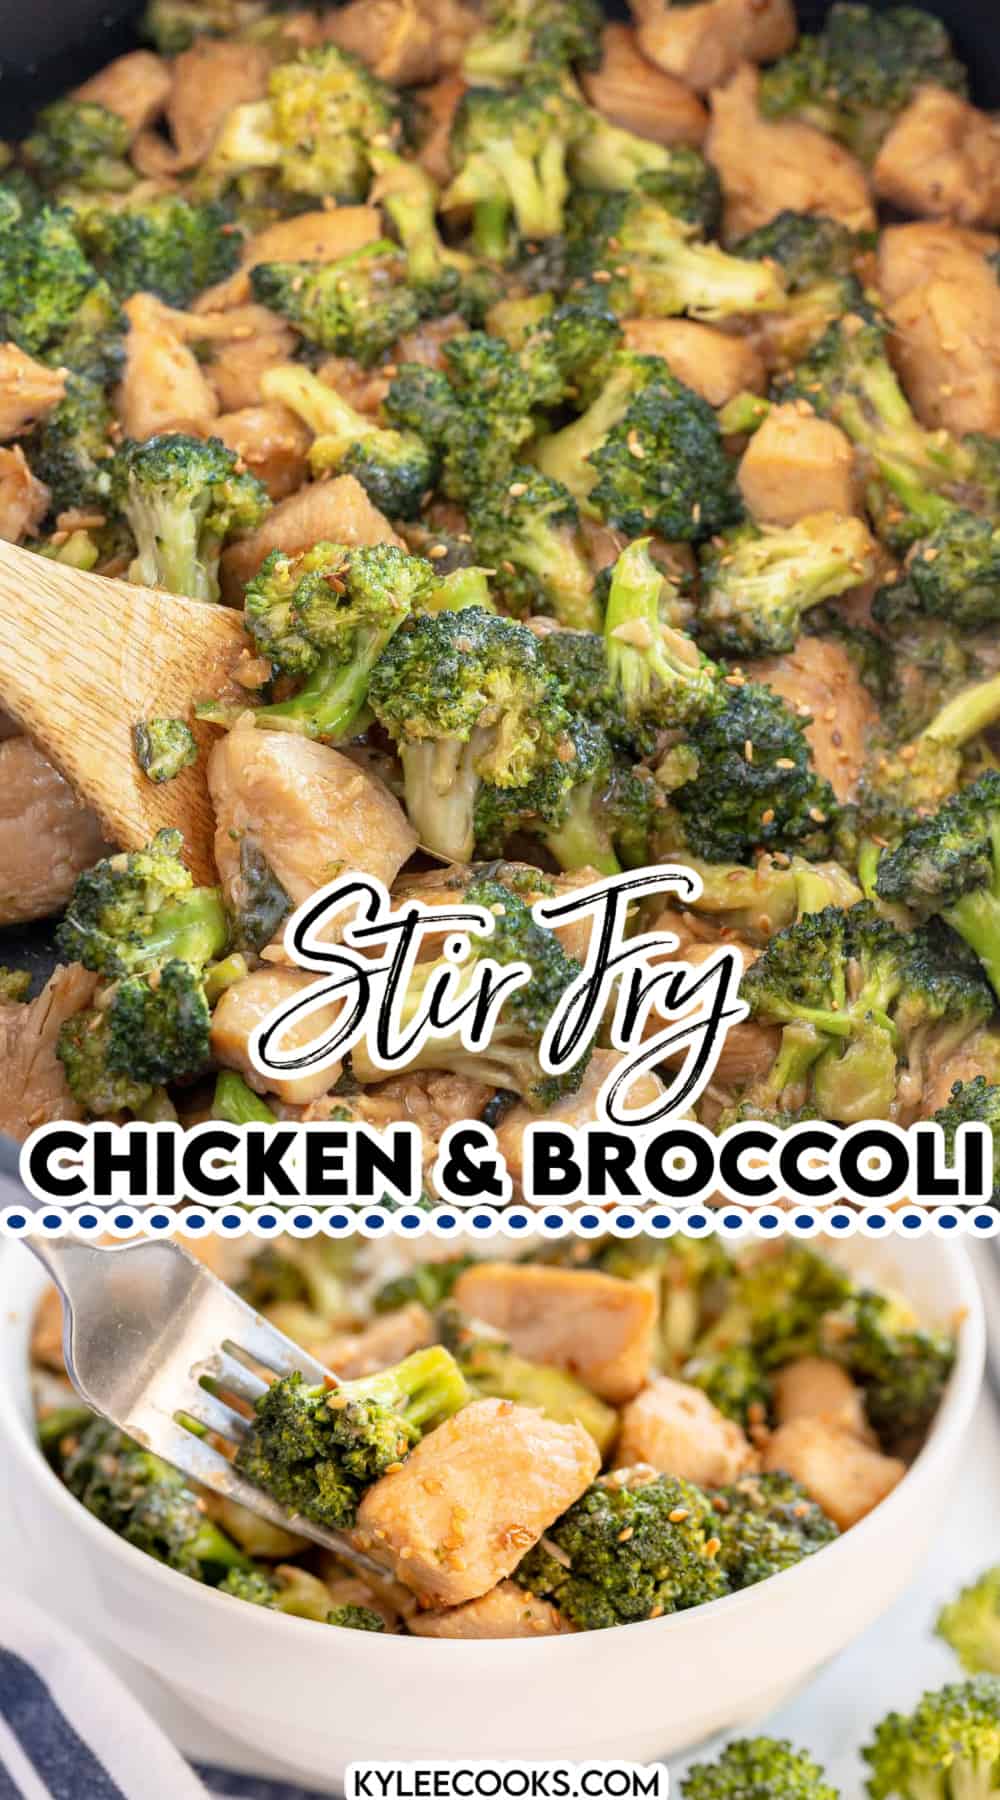 collage of chicken broccoli stir fry with recipe name overlaid in text.